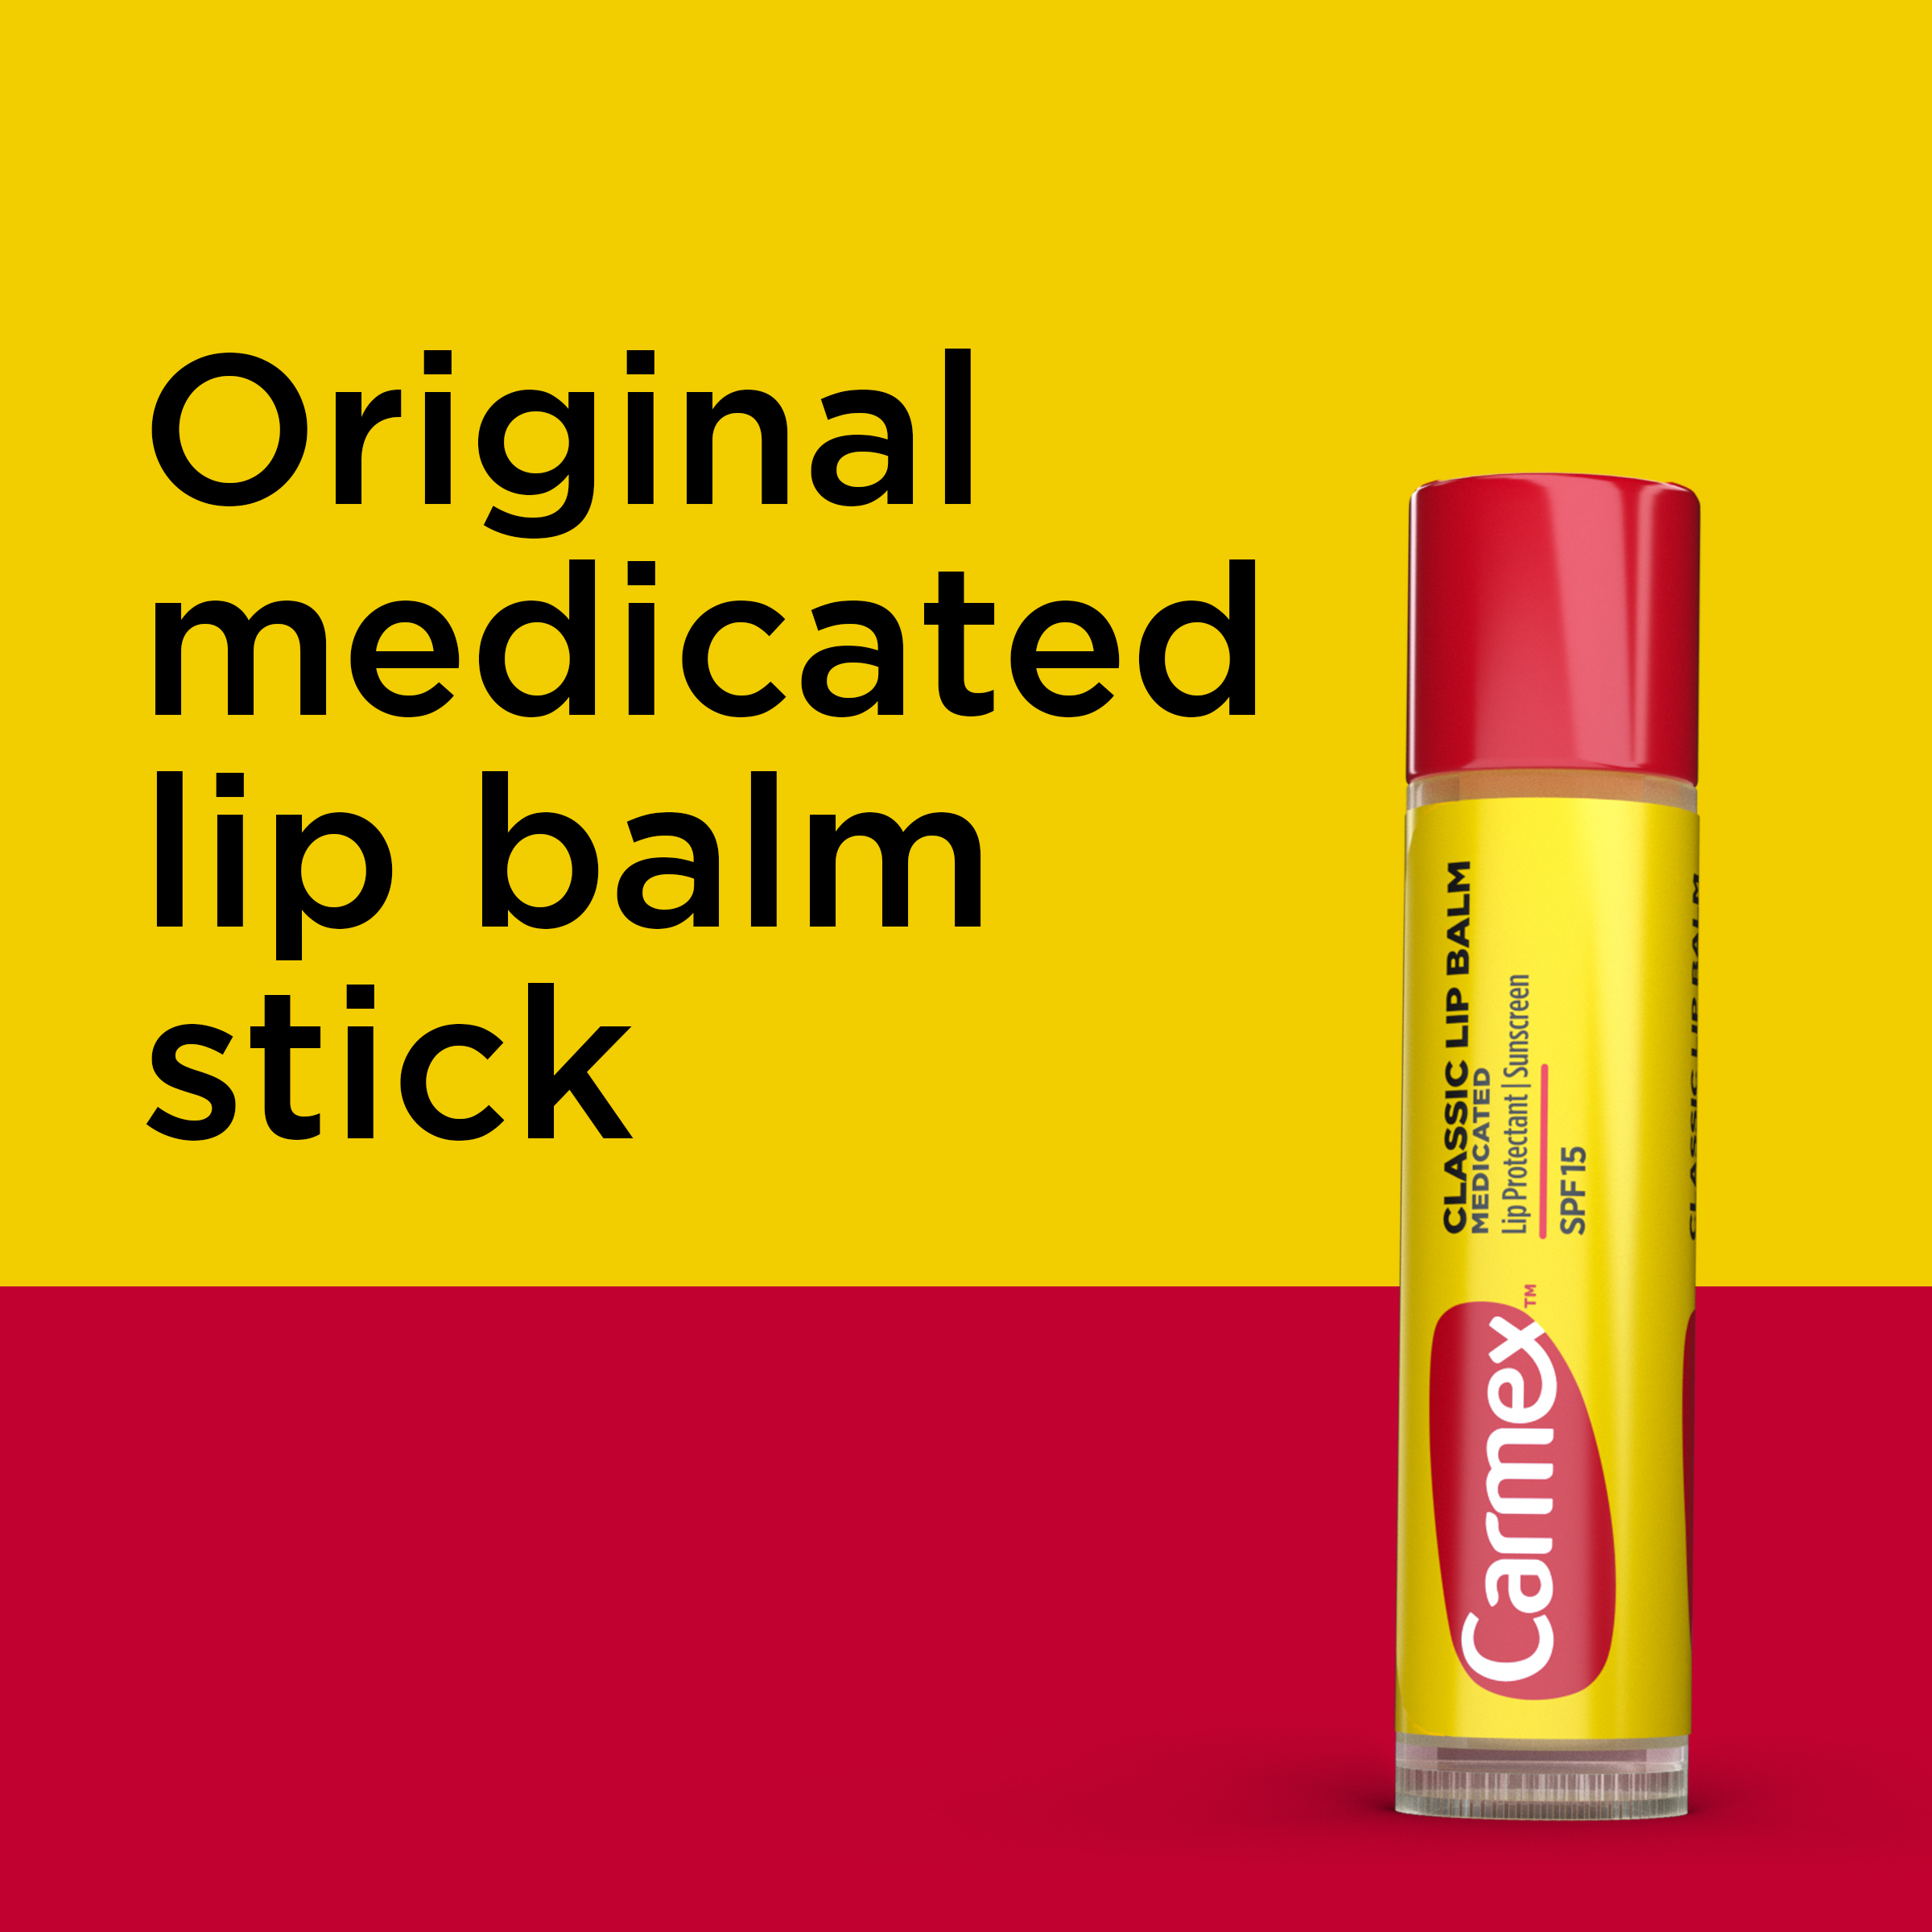 Carmex Moisturizing Medicated Lip Balm with Cocoa Butter, Camphor & Menthol, Multi-Flavor, 24 Pack - image 10 of 11